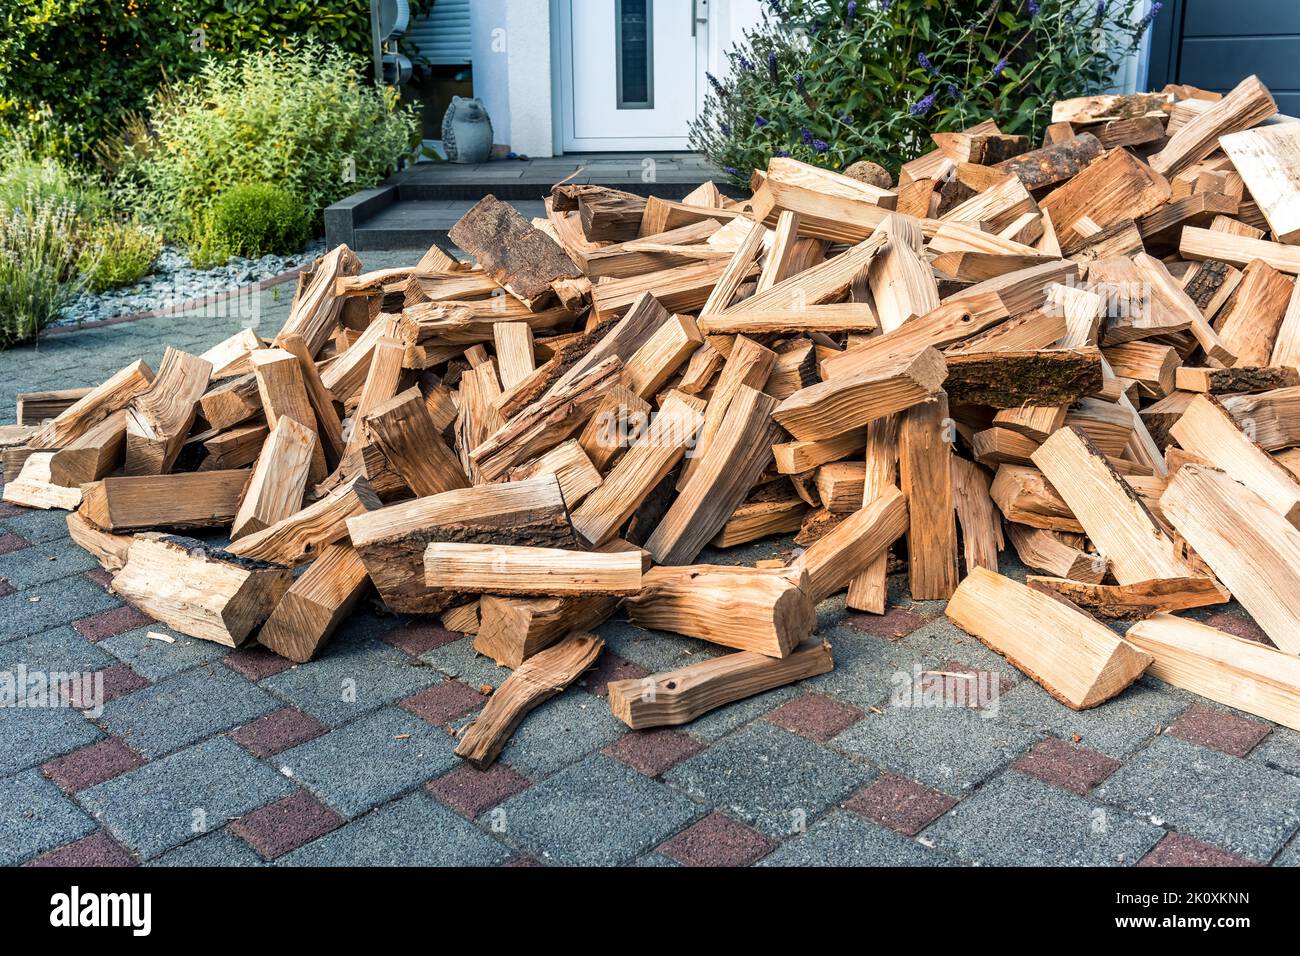 Stock of firewood for heating house. Stacked dried logs in front of the house. Stock Photo